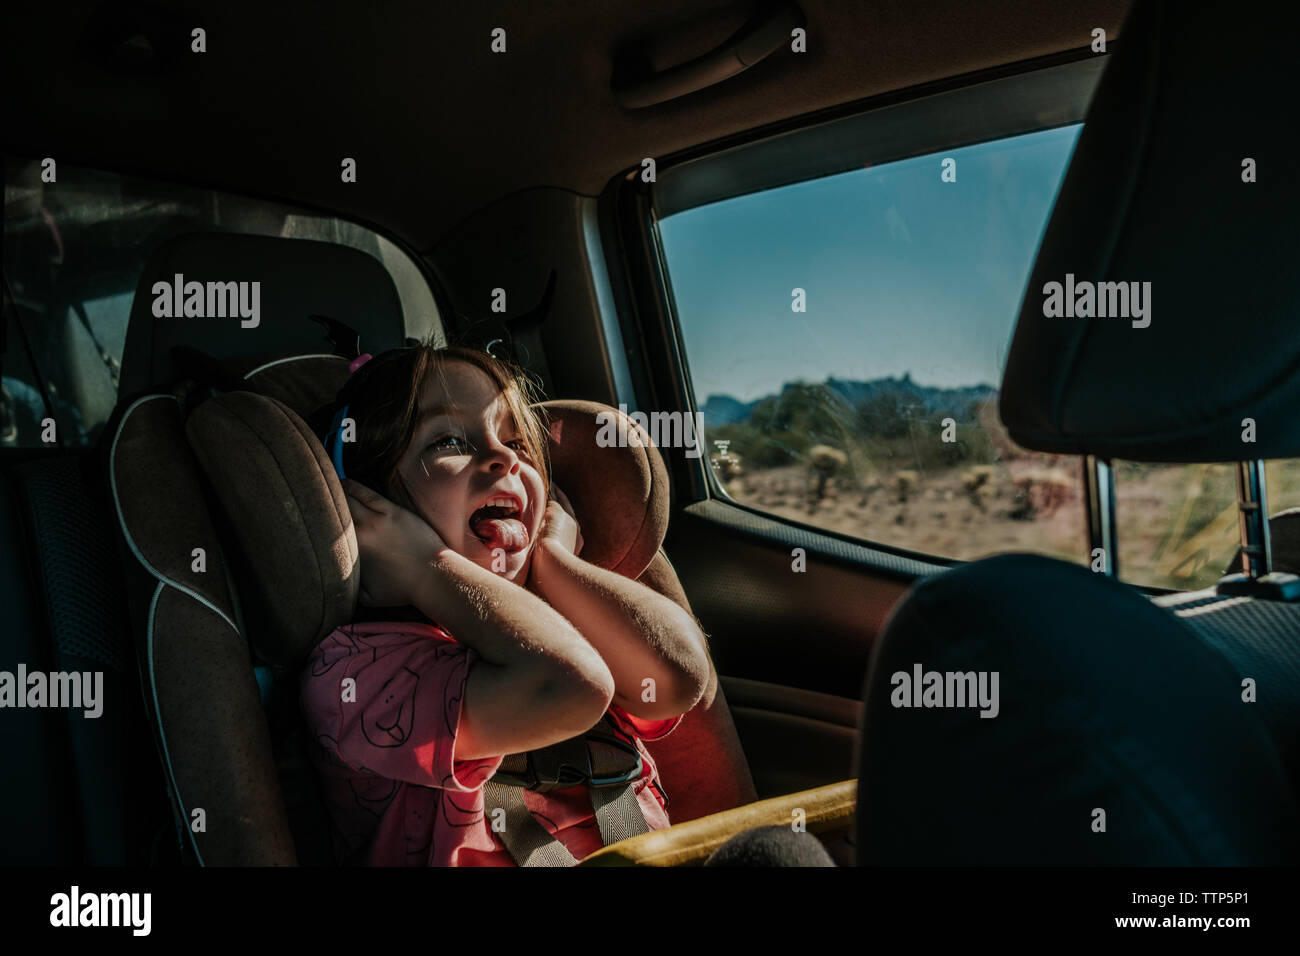 Girl in a carseat, on a road trip through California Stock Photo